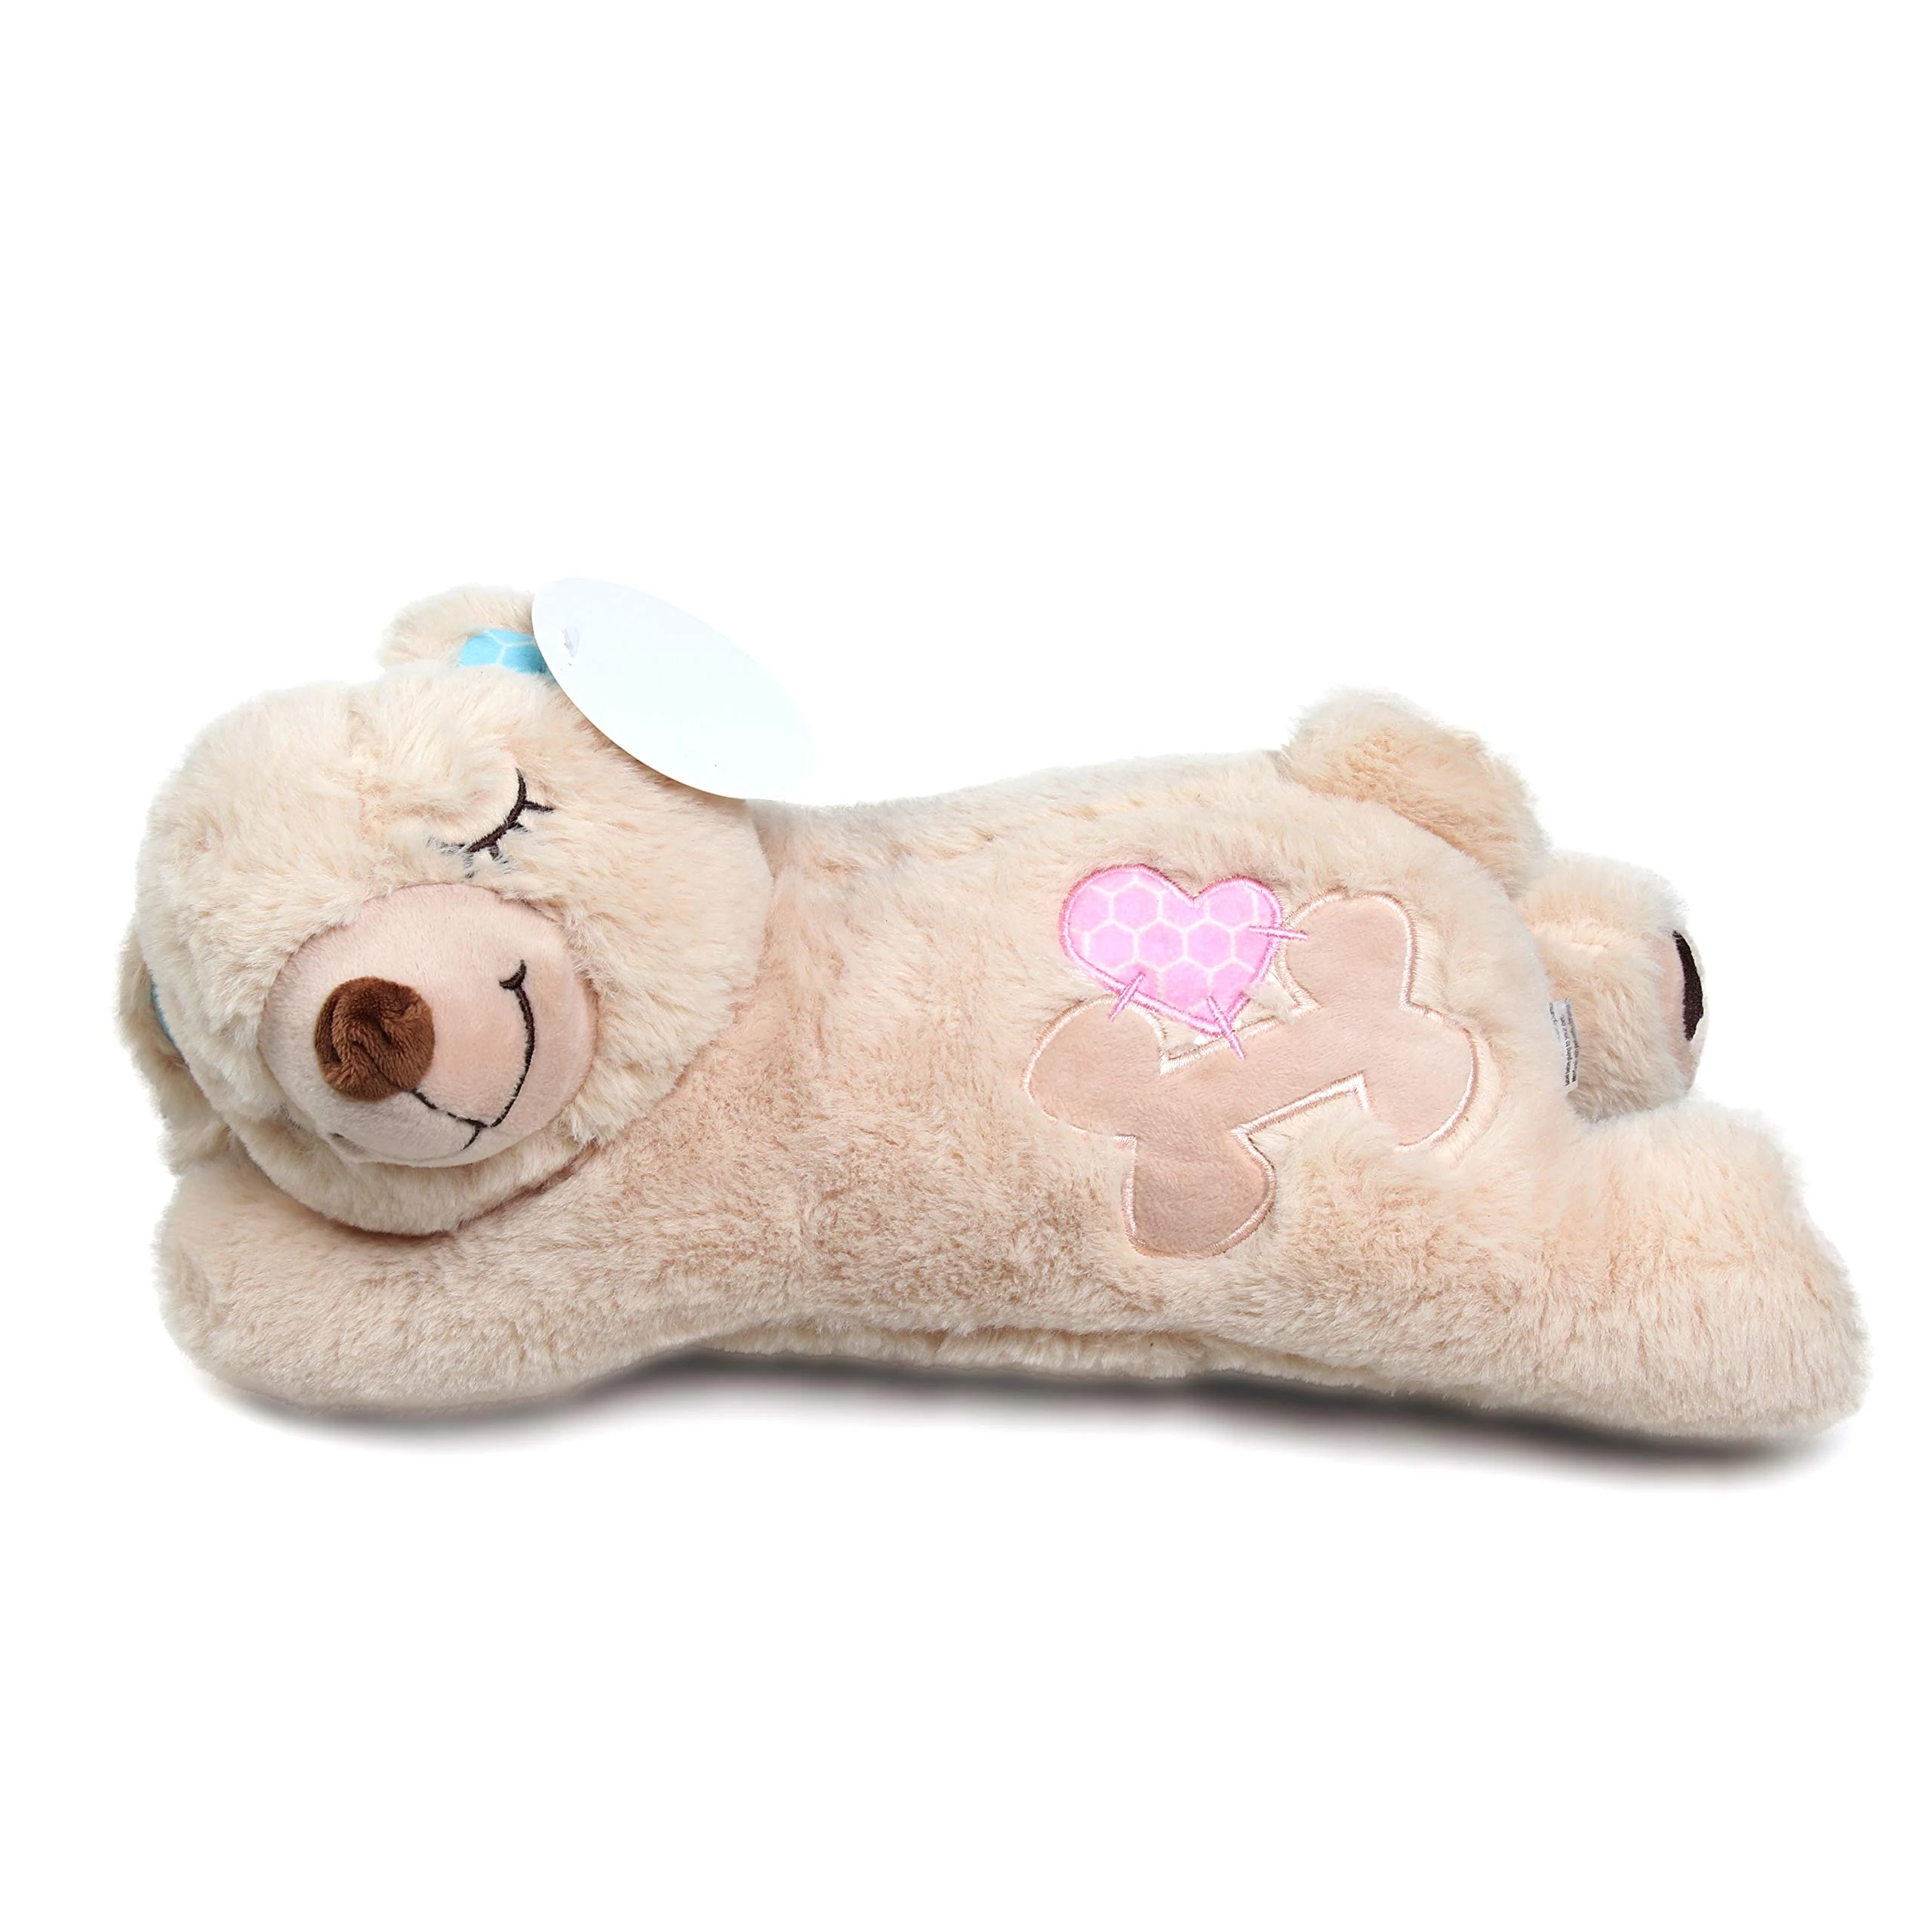 Dog Soft Plush Toy Pet Heart Beat Plush Bear Toy with Warmer Bag Puppy Anxiety Relief Toy for Puppy Dogs 